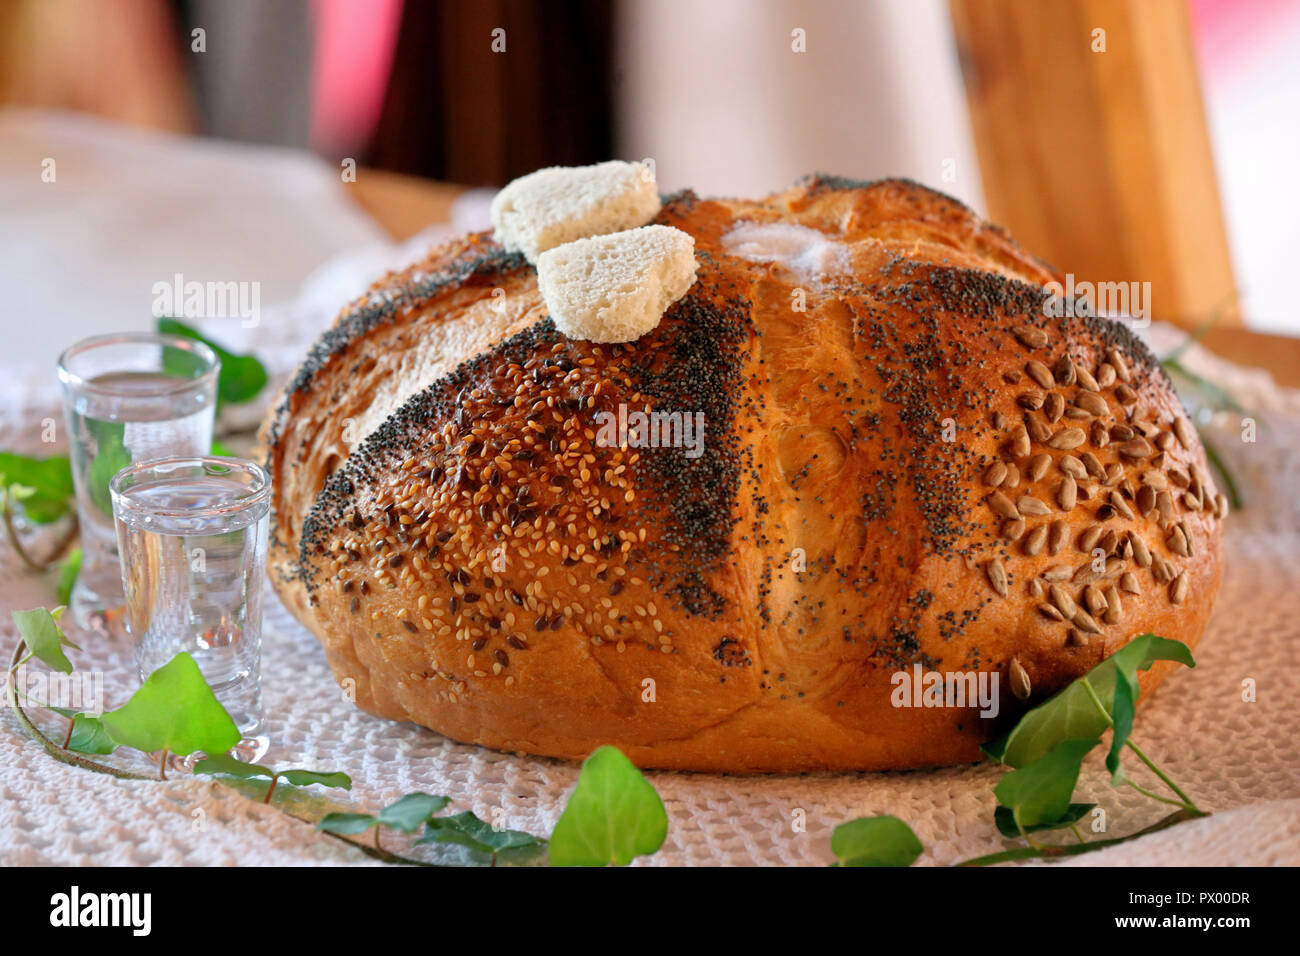 Round bread and vodka, a traditional greeting of a bride and groom on wedding reception Stock Photo